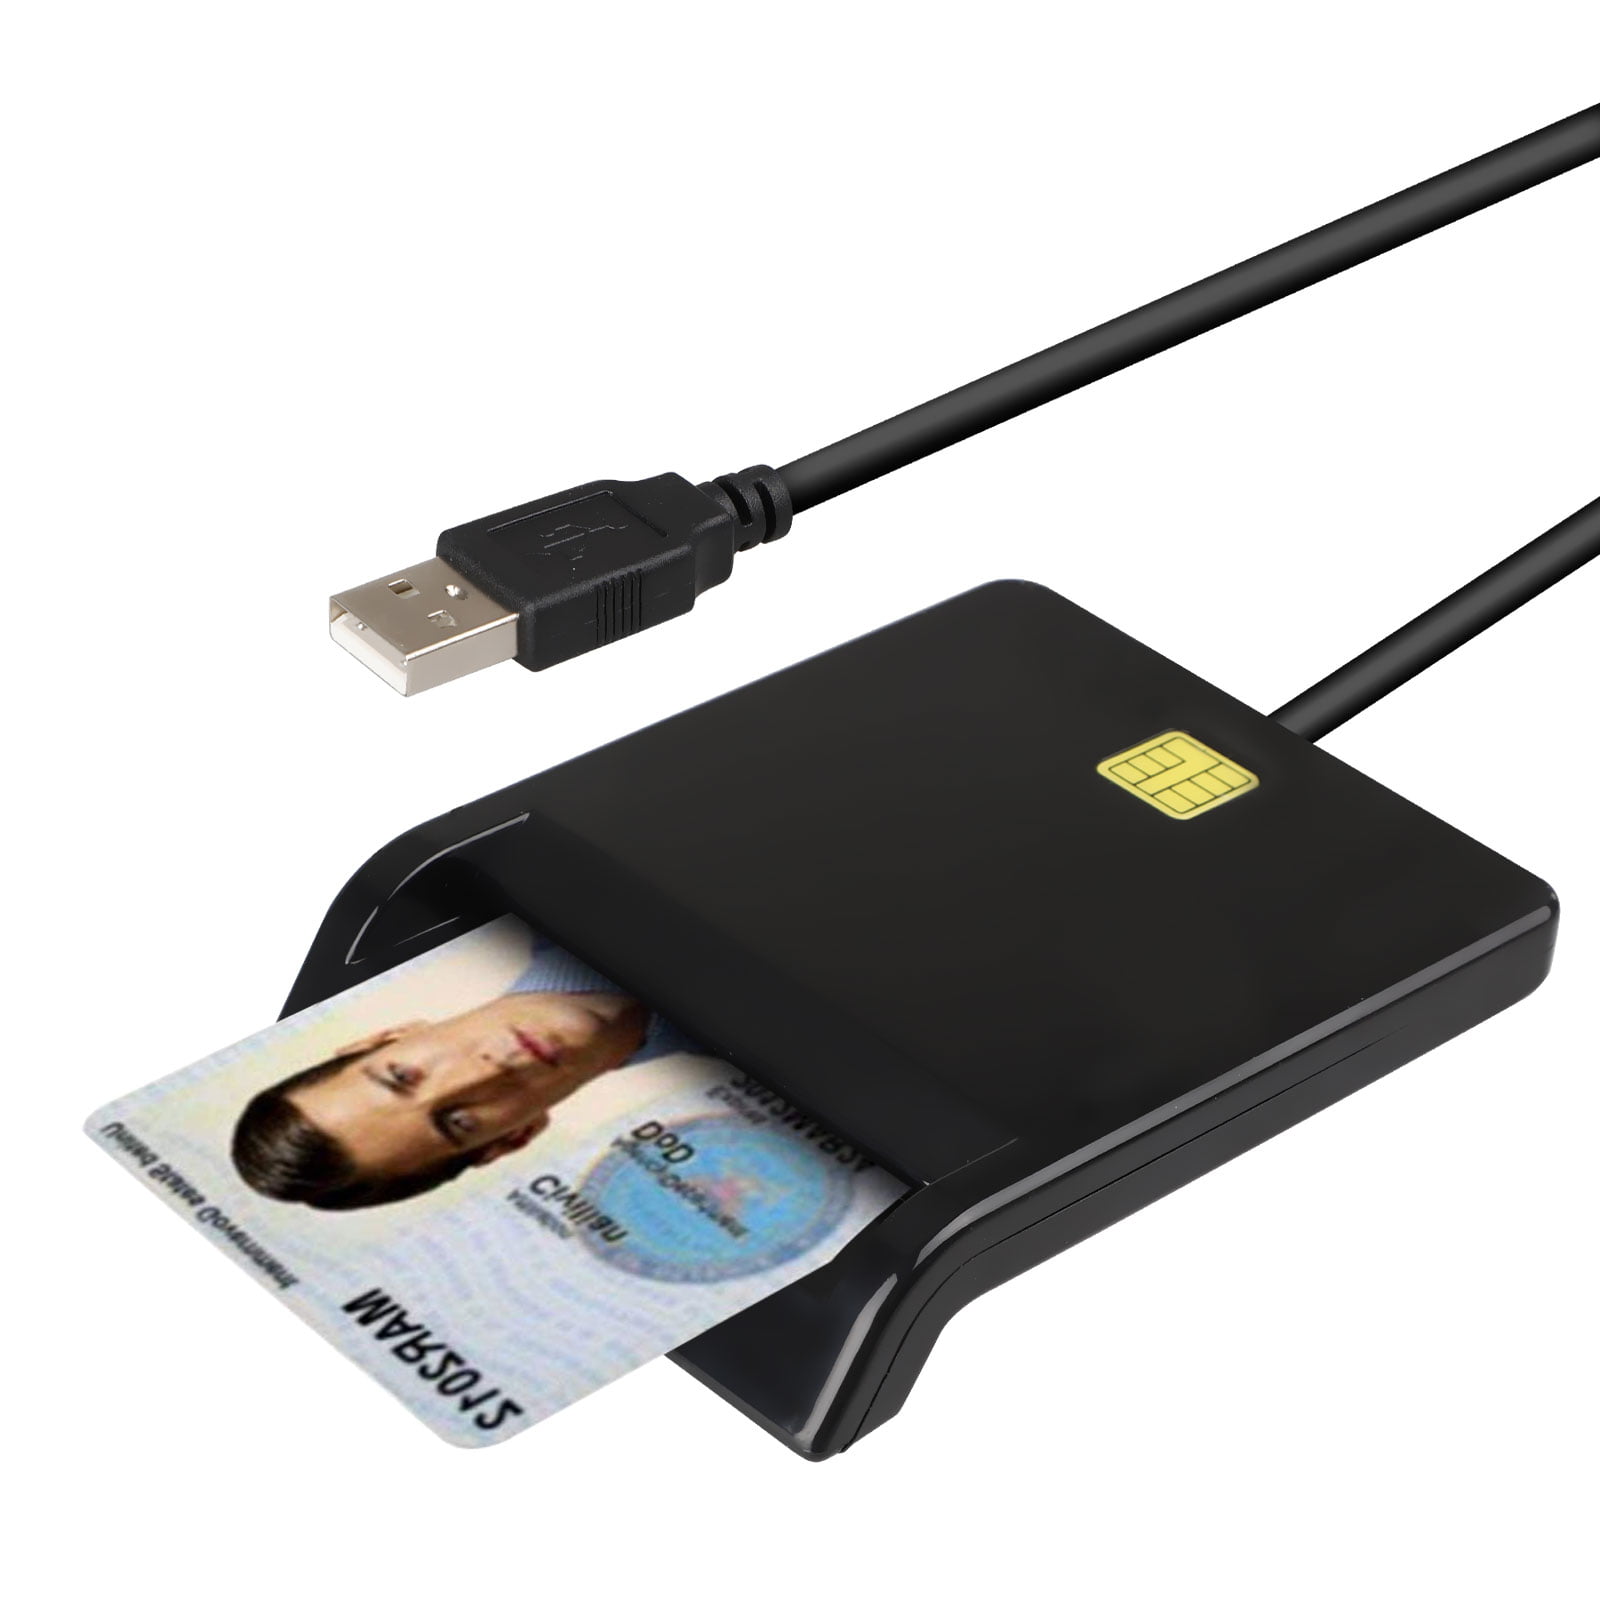 MultiFunction CAC Card Reader Can Read DOD Military Common Access Smart Card 